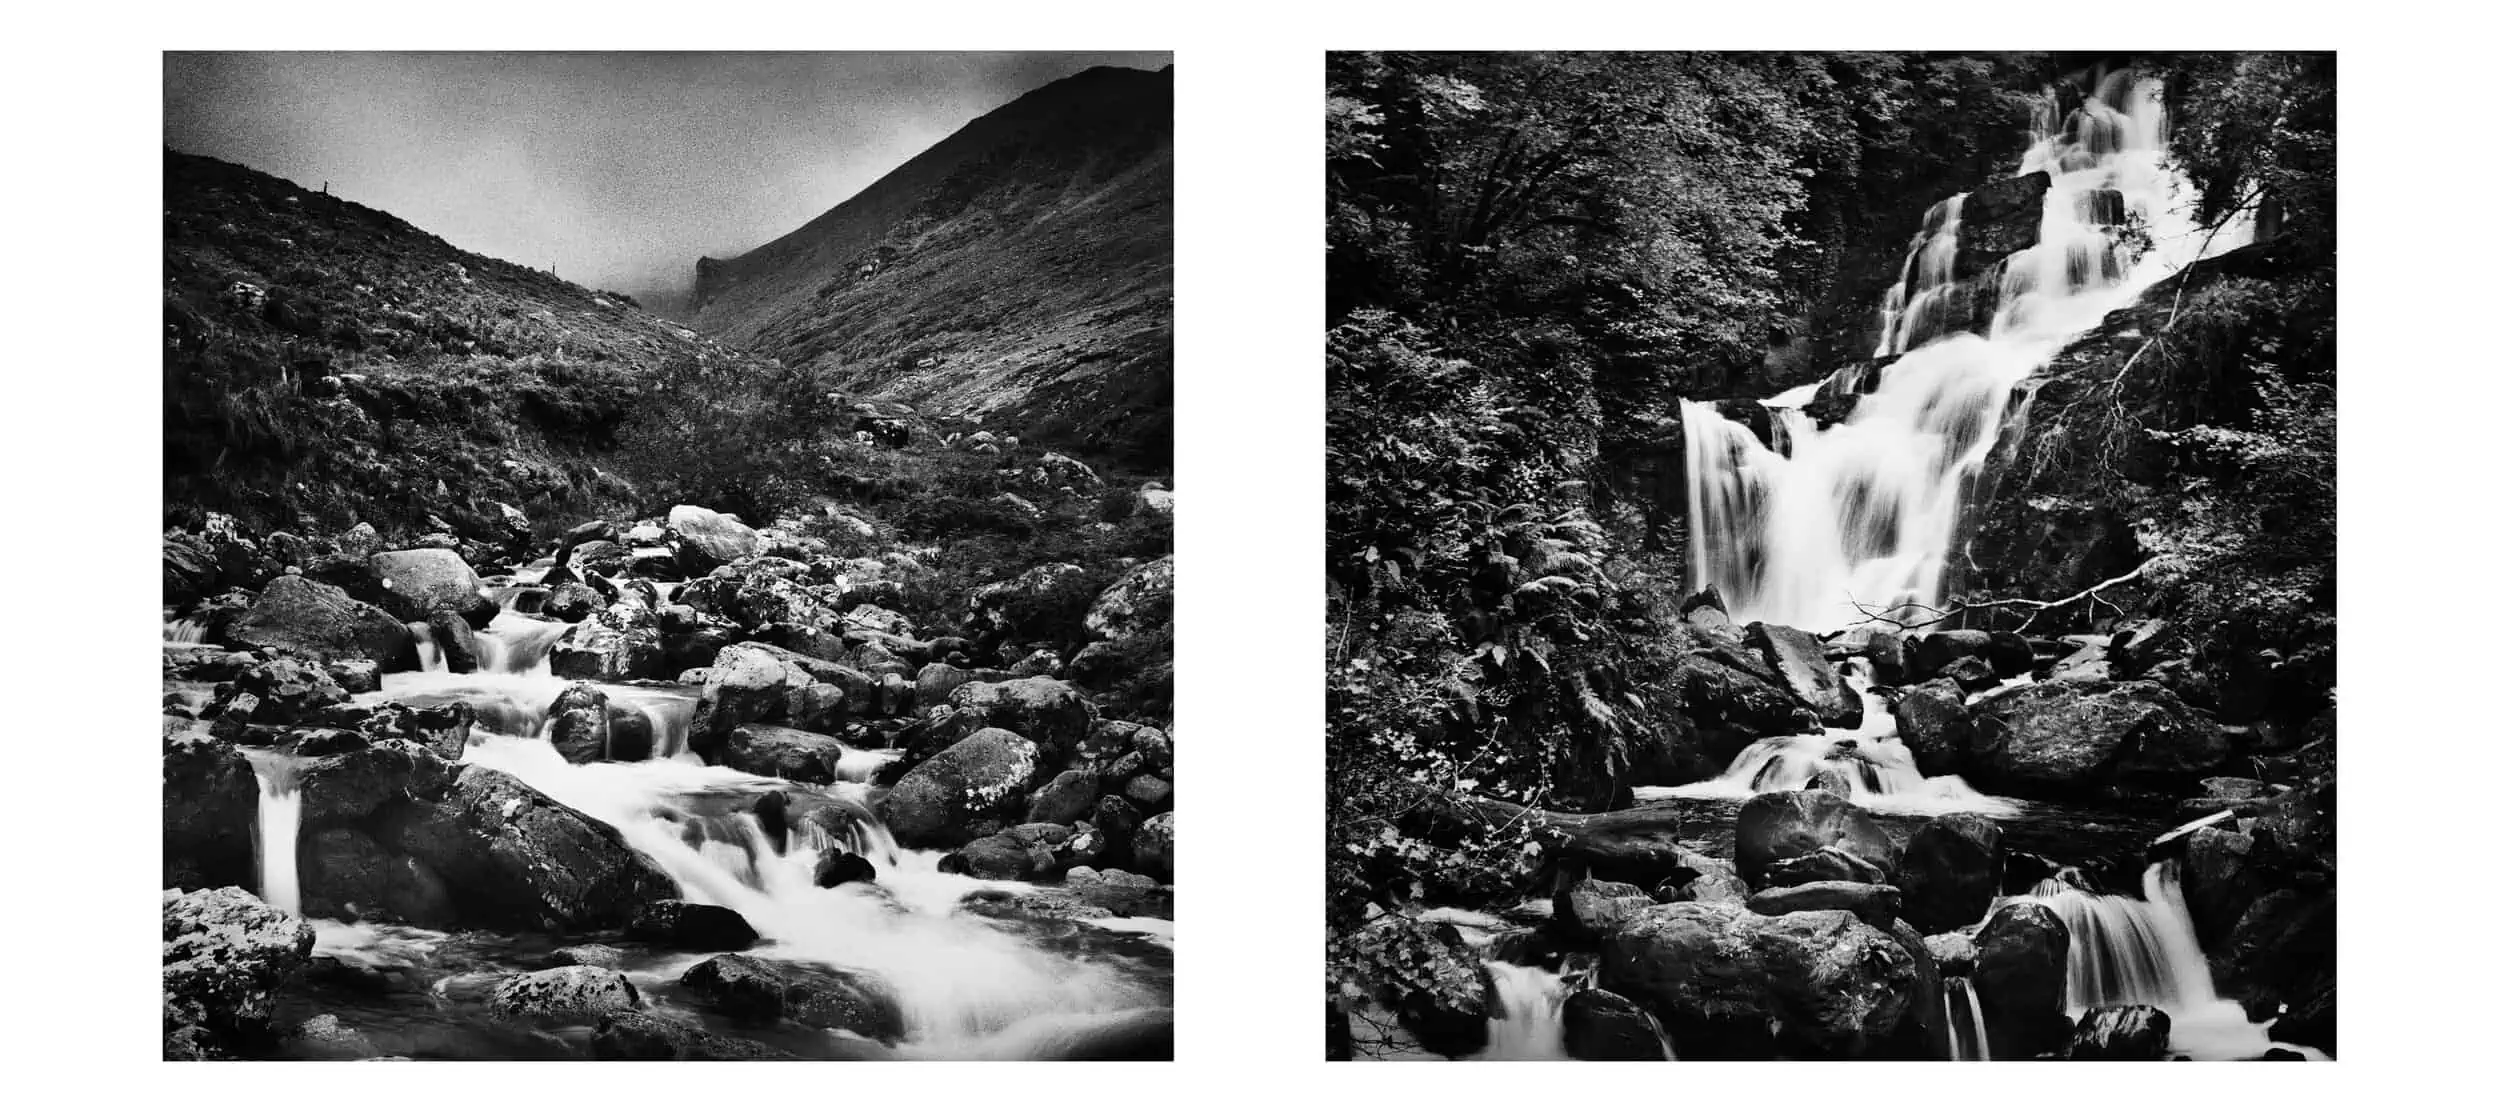 Image ID: A series of two black and white images. The images are grainy and have been made on film. These images show white-water streams with small waterfalls flowing through a dark landscape. The images are generally dark, but the flowing water, blurred through long exposure is bright white.